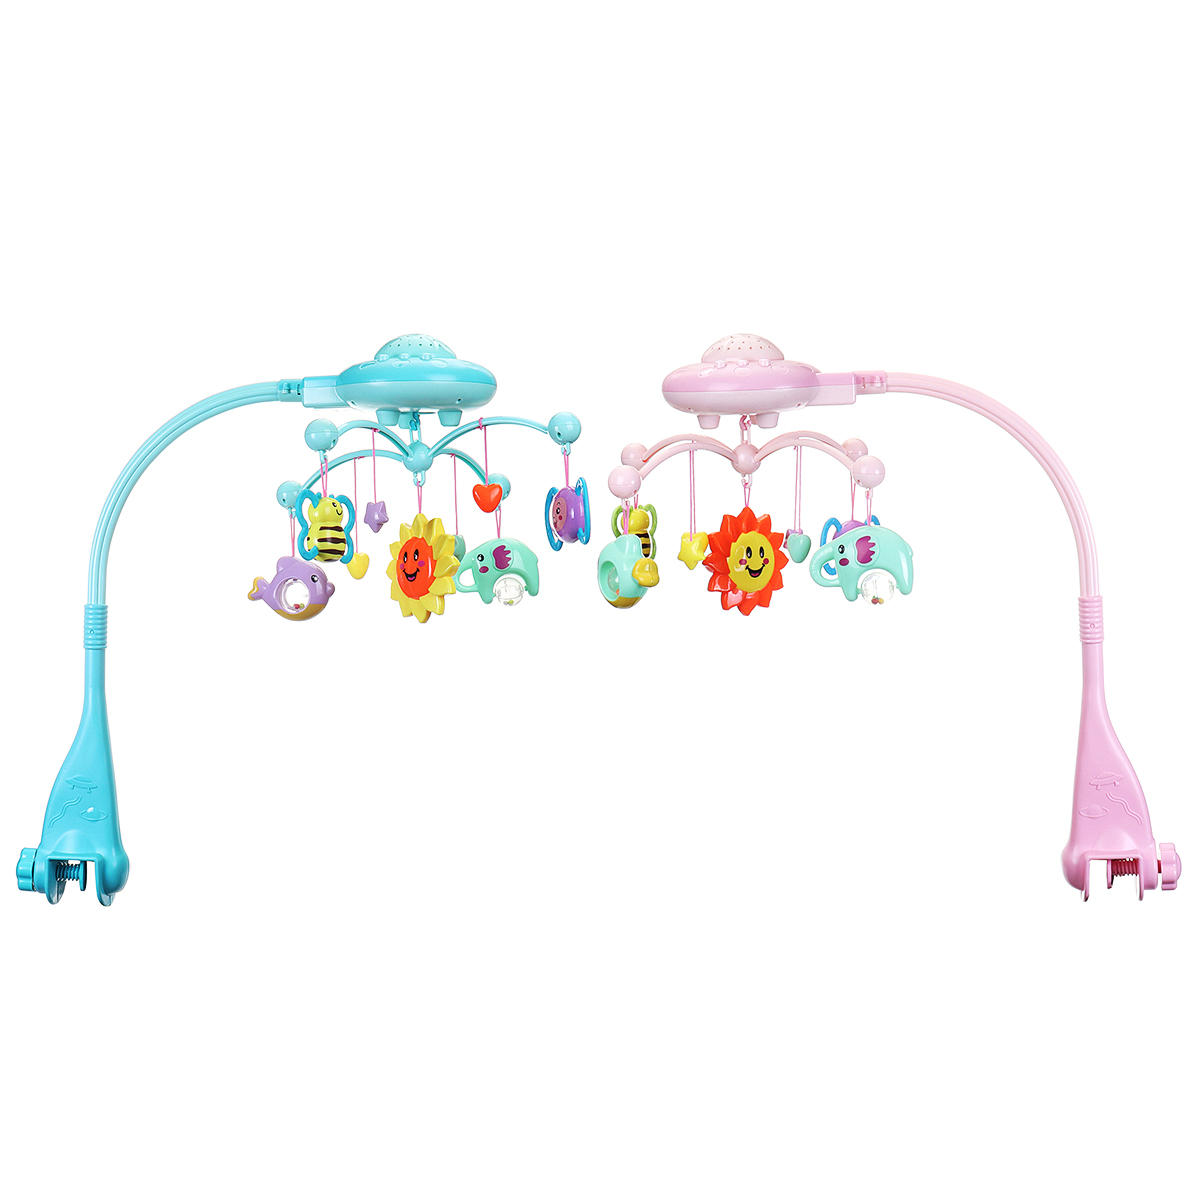 Crib-Mobile-Musical-Bed-Bell-With-Animal-Rattles-Projection-Early-Learning-Toys-0-12-Months-1434065-8